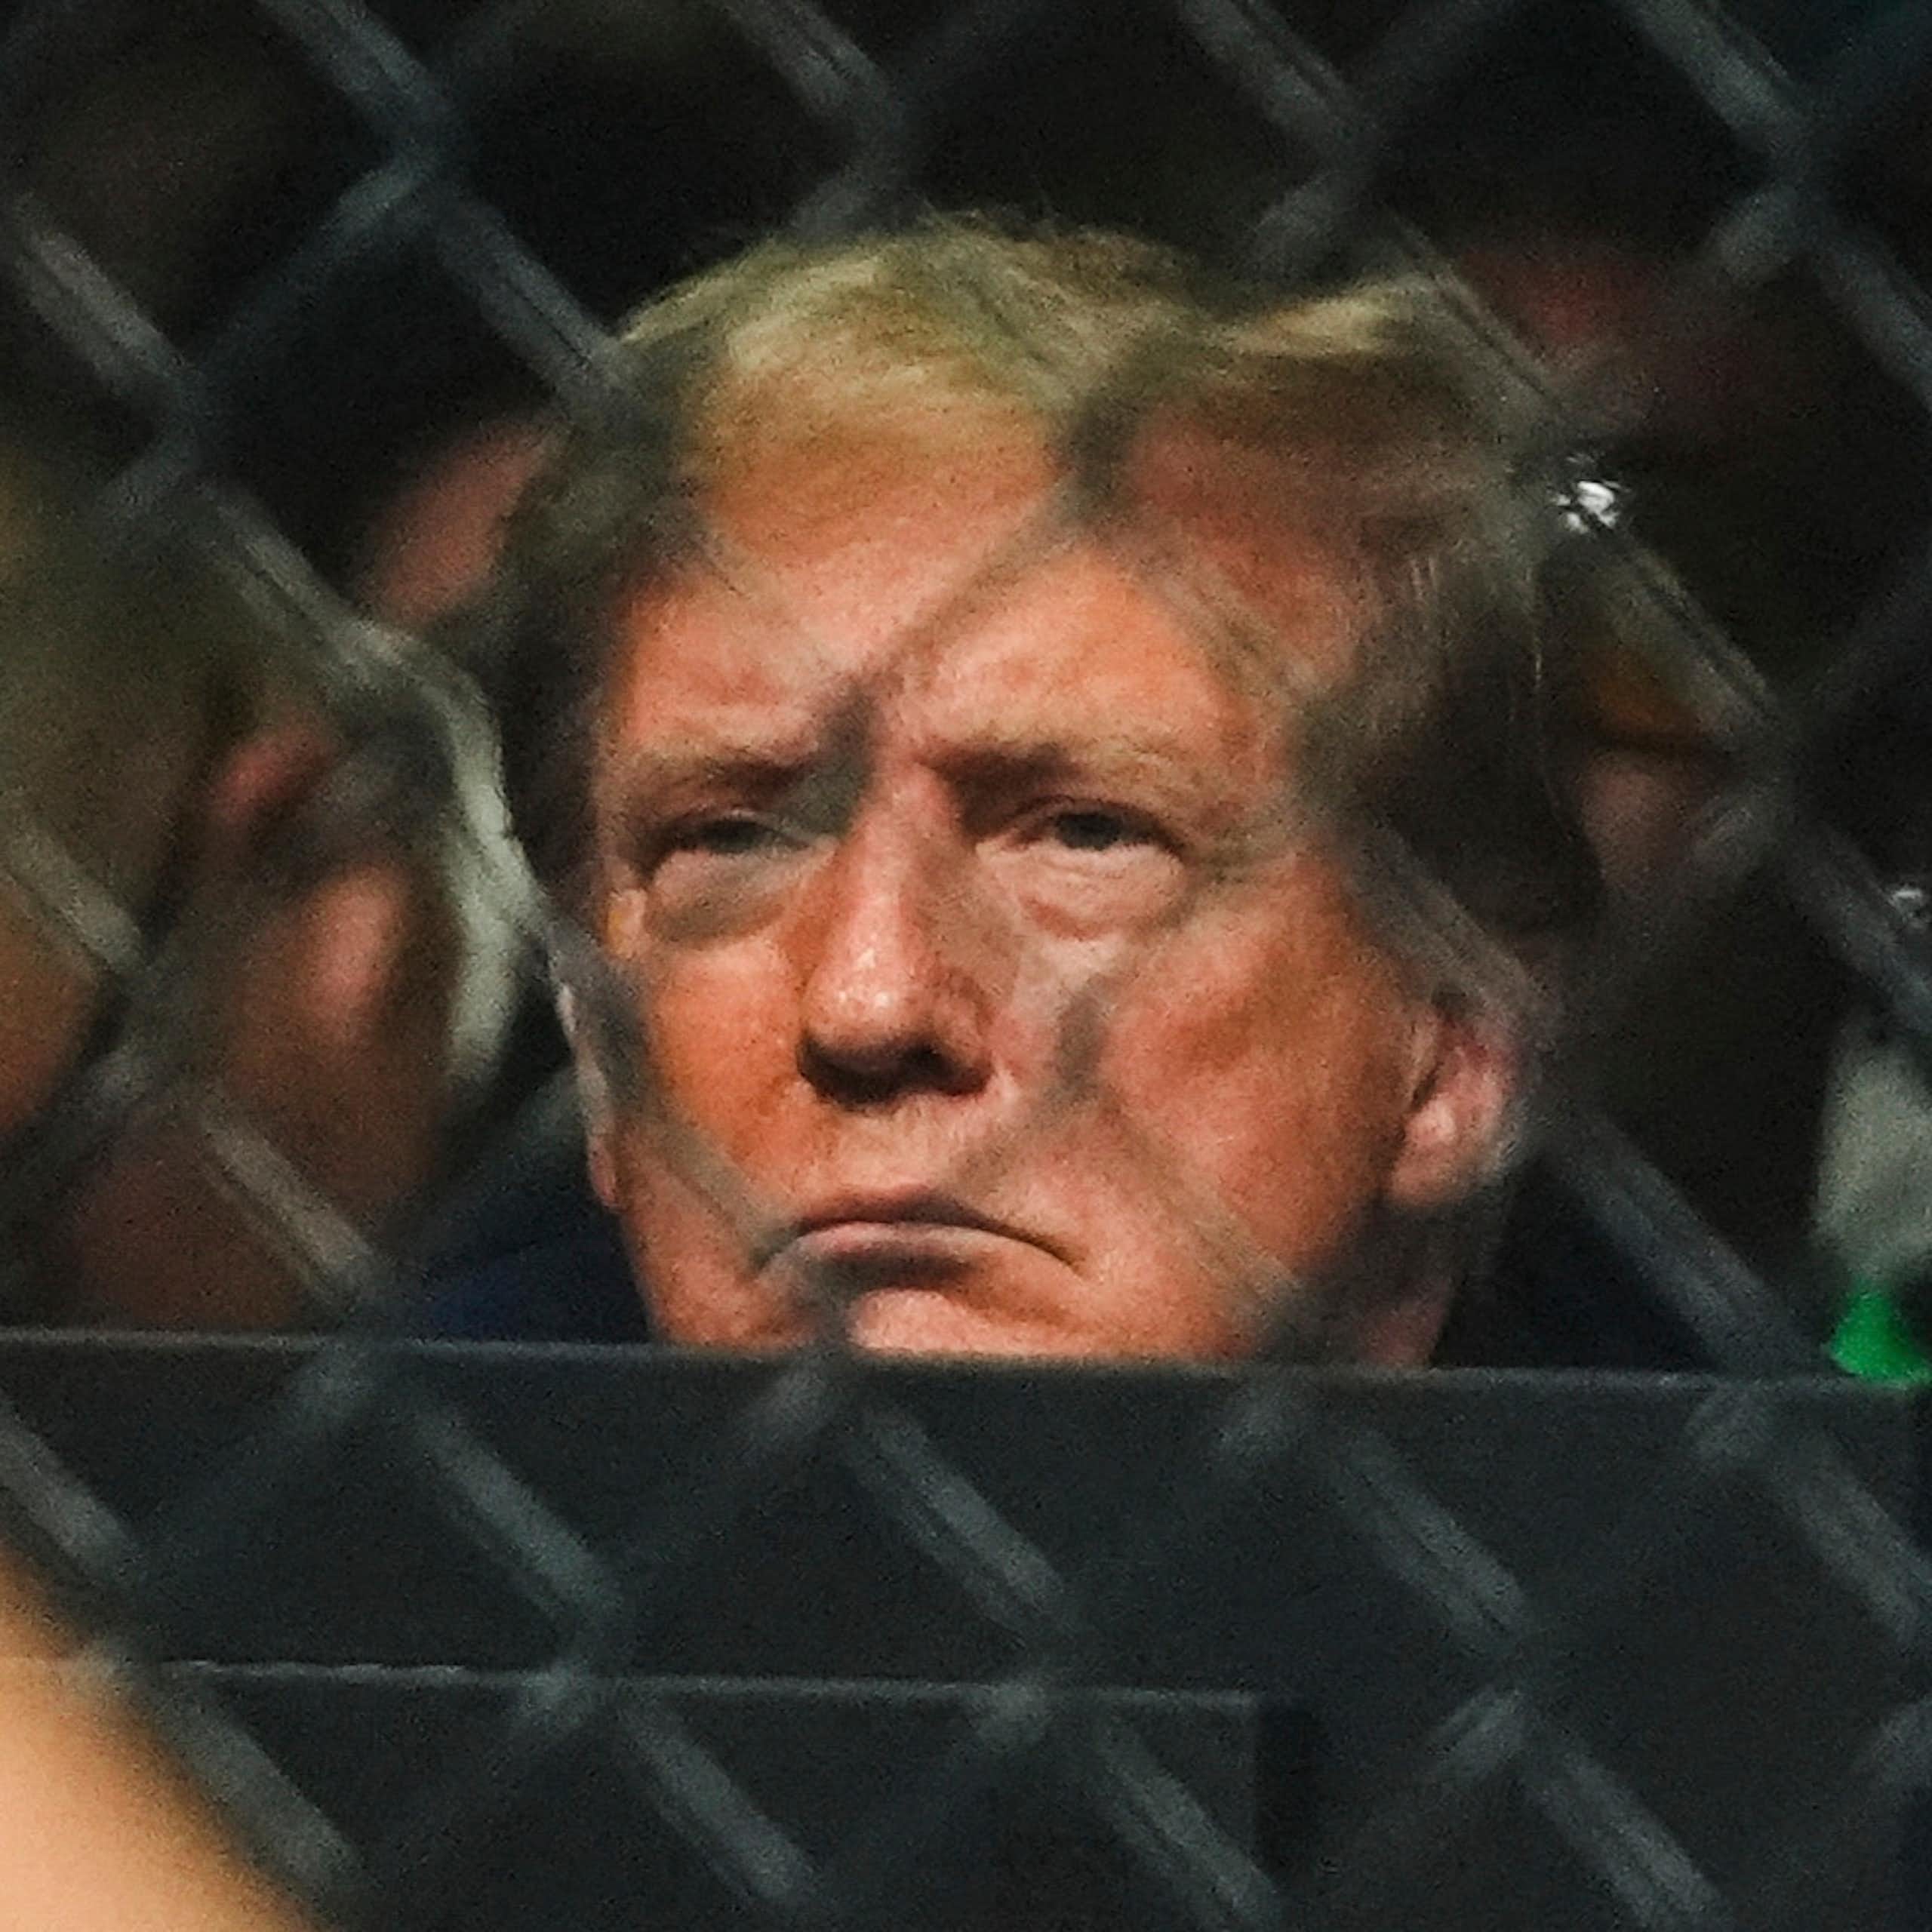 A man with blond hair frowns and is pictured through a chain link barrier.